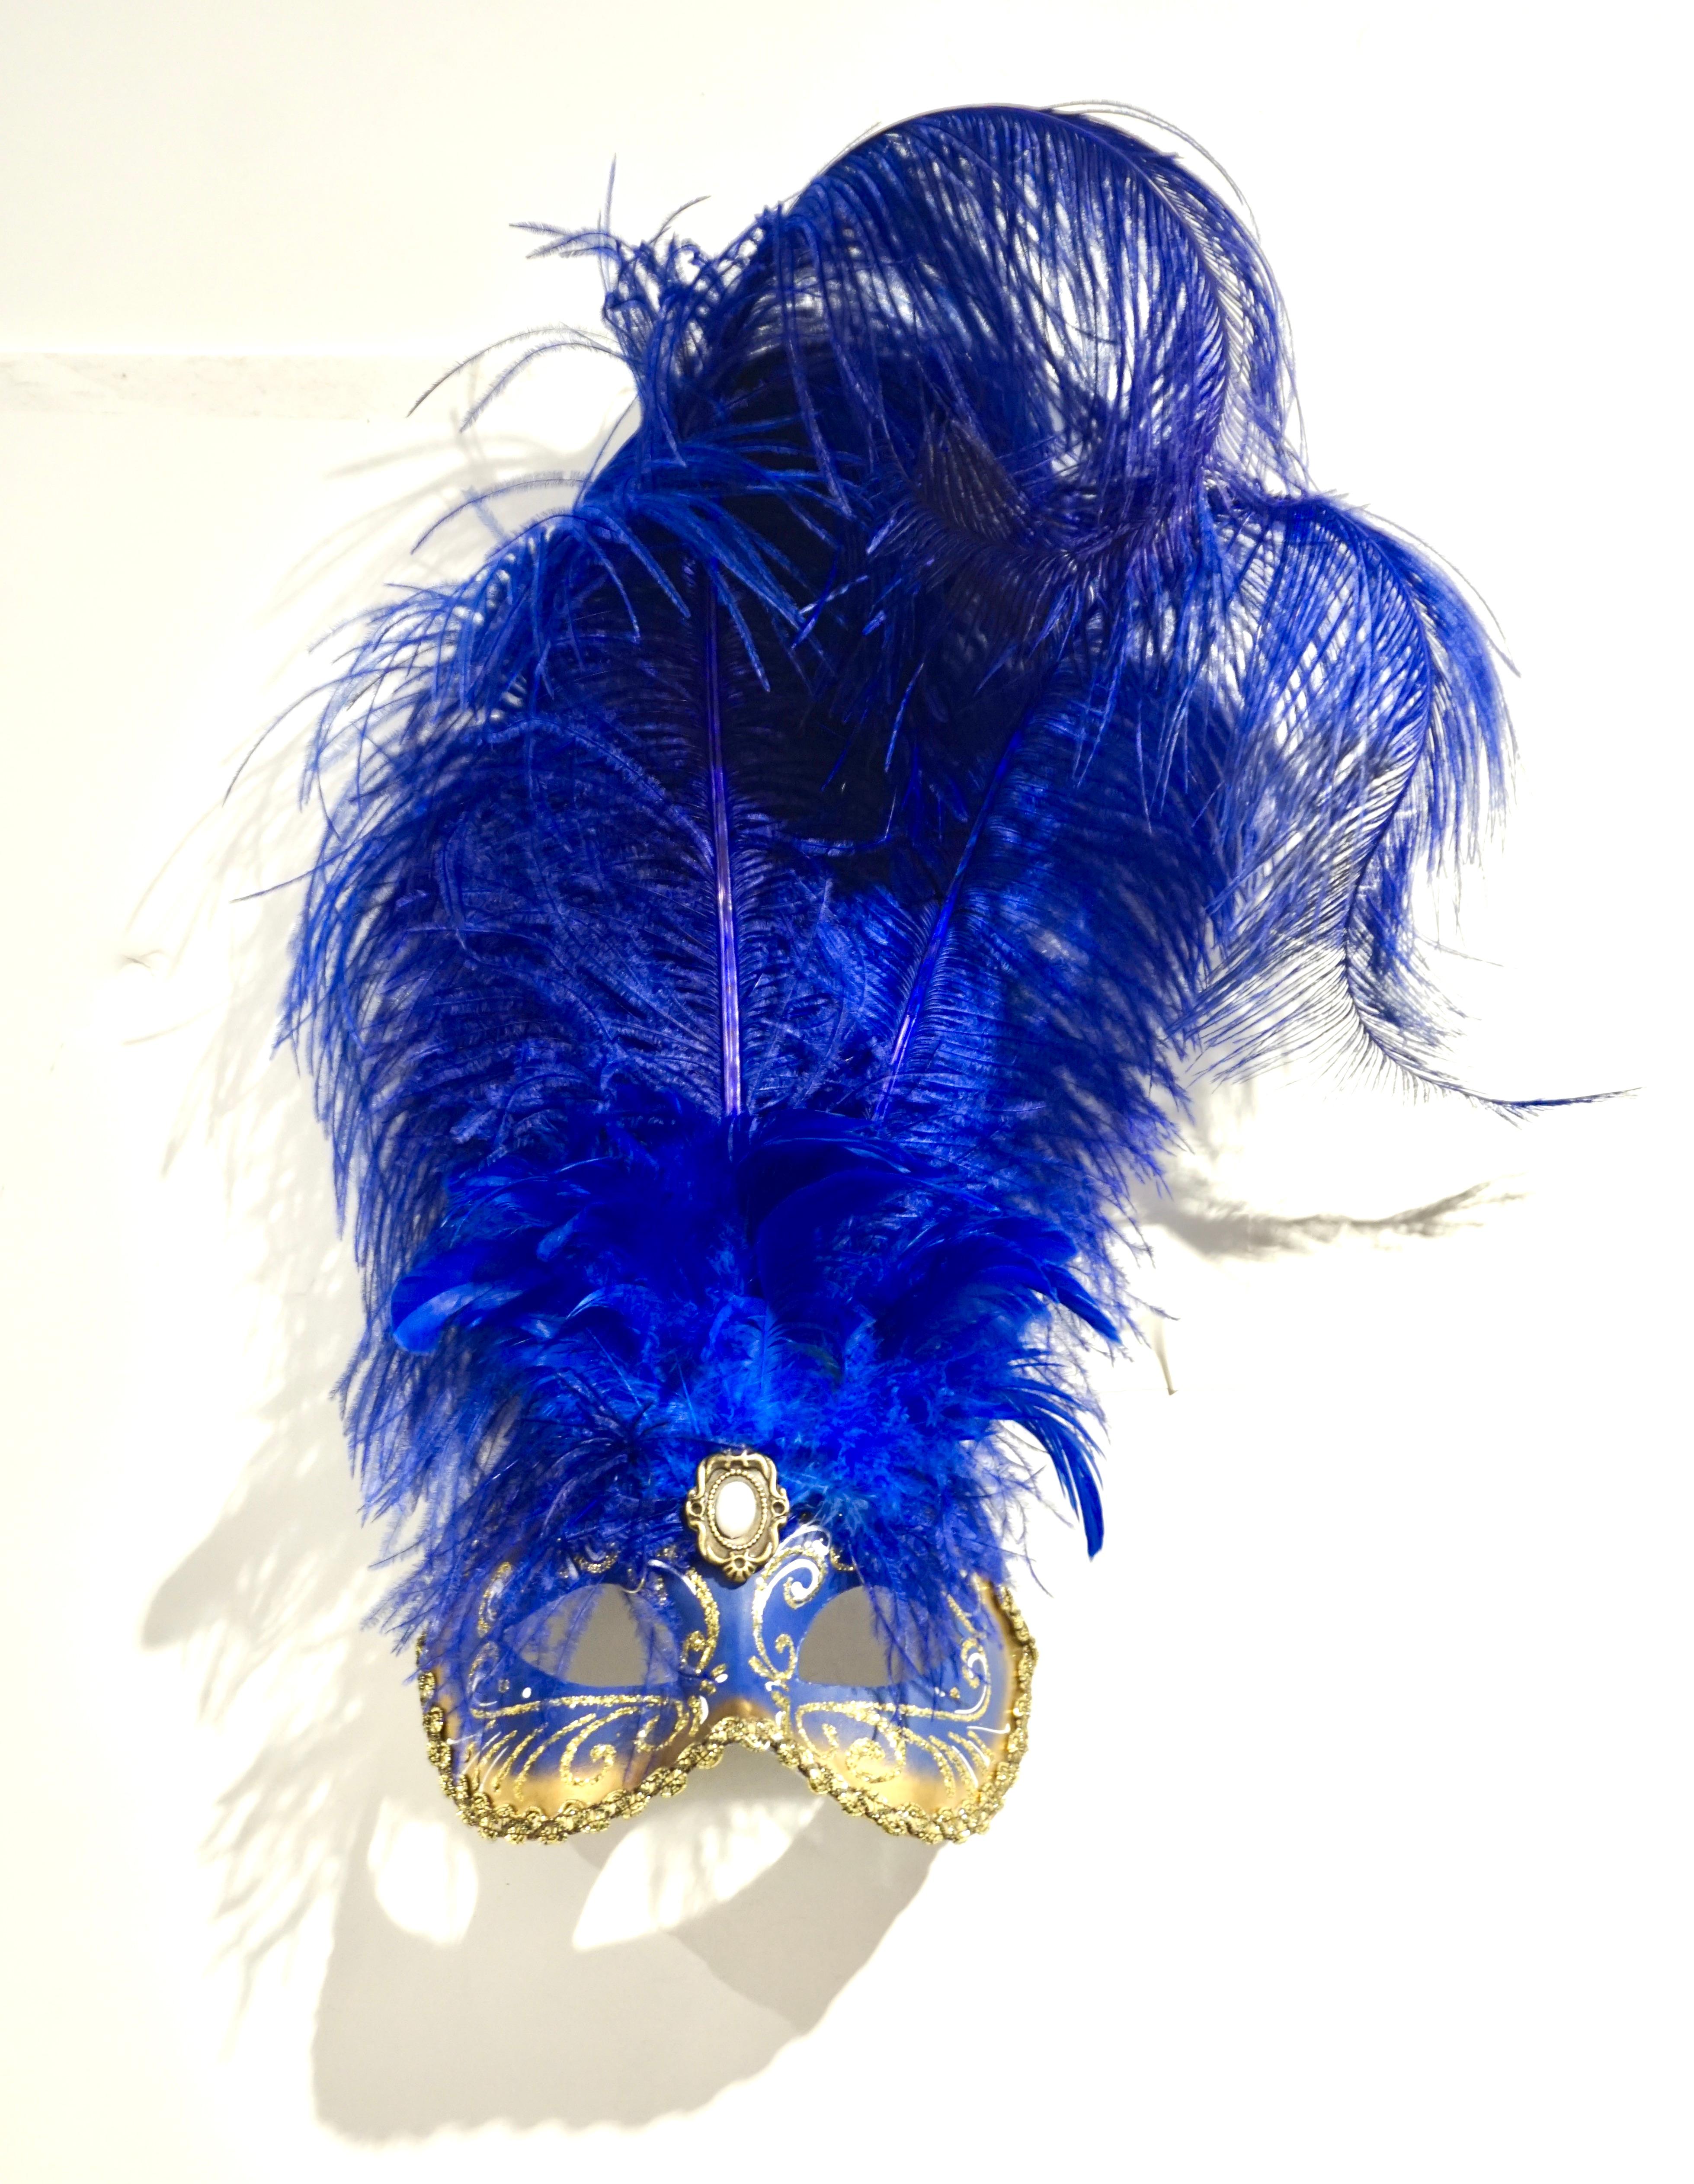 Italian Modern Venetian Handmade Blue and Gold Carnival Mask with Feathers For Sale 1